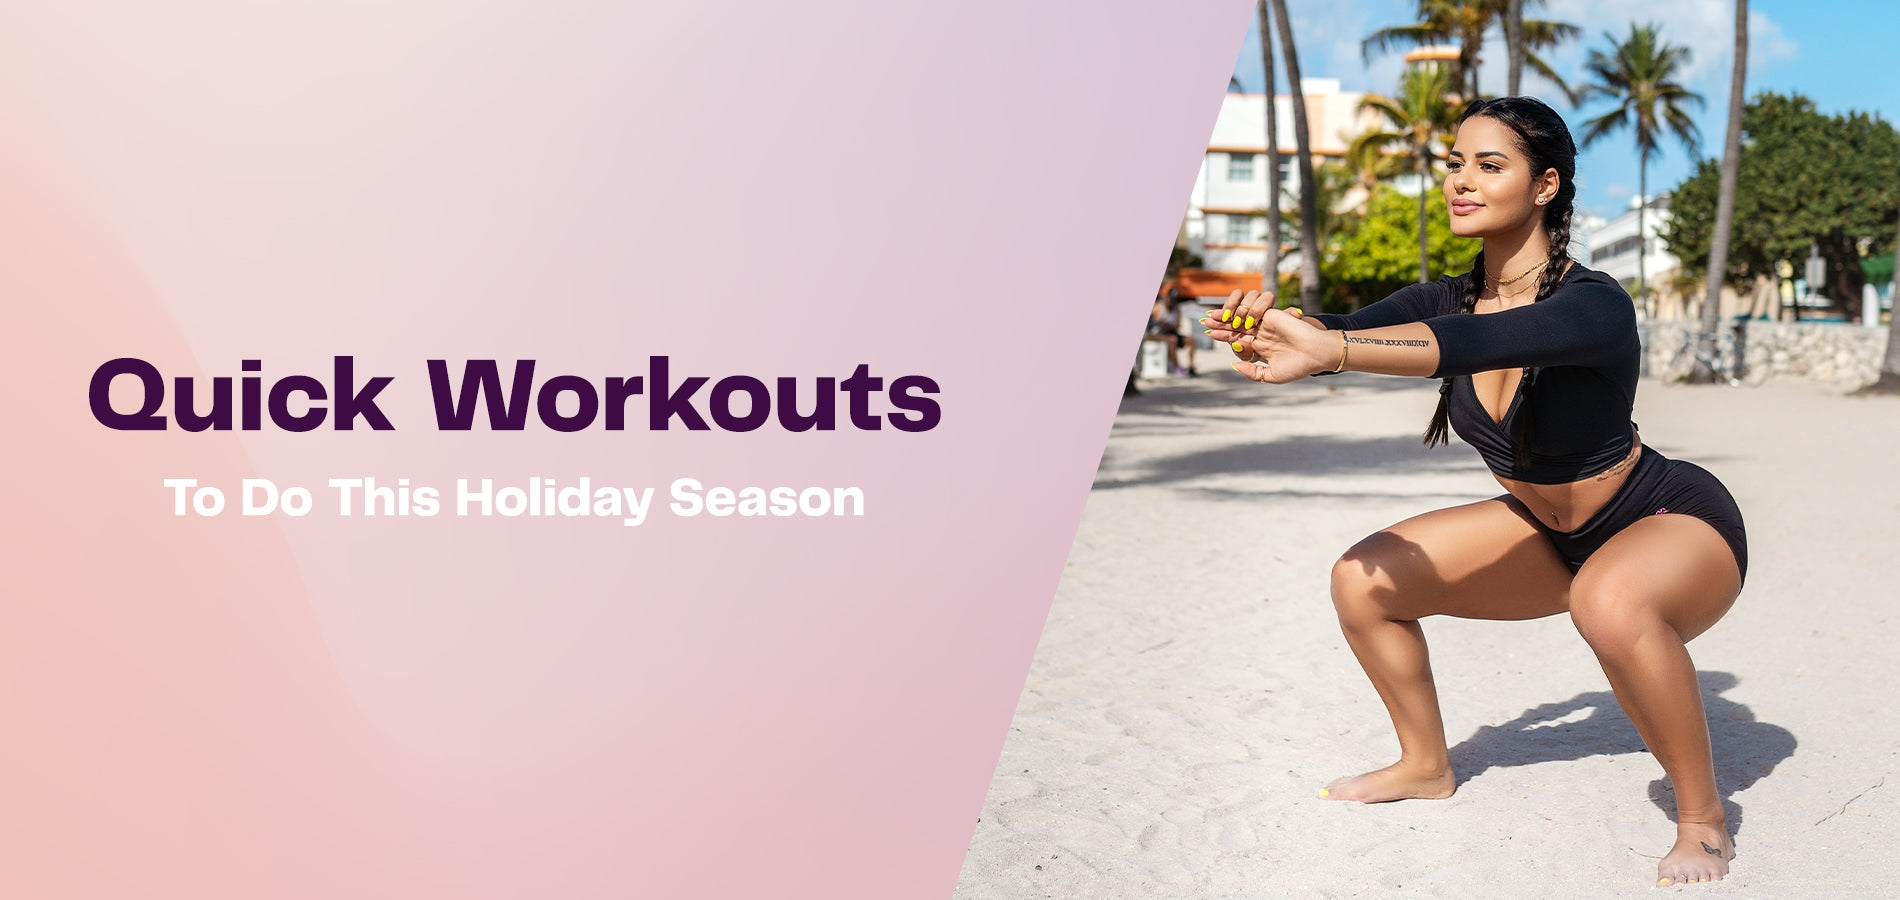 Quick Workouts To Do This Holiday Season-WBK FIT